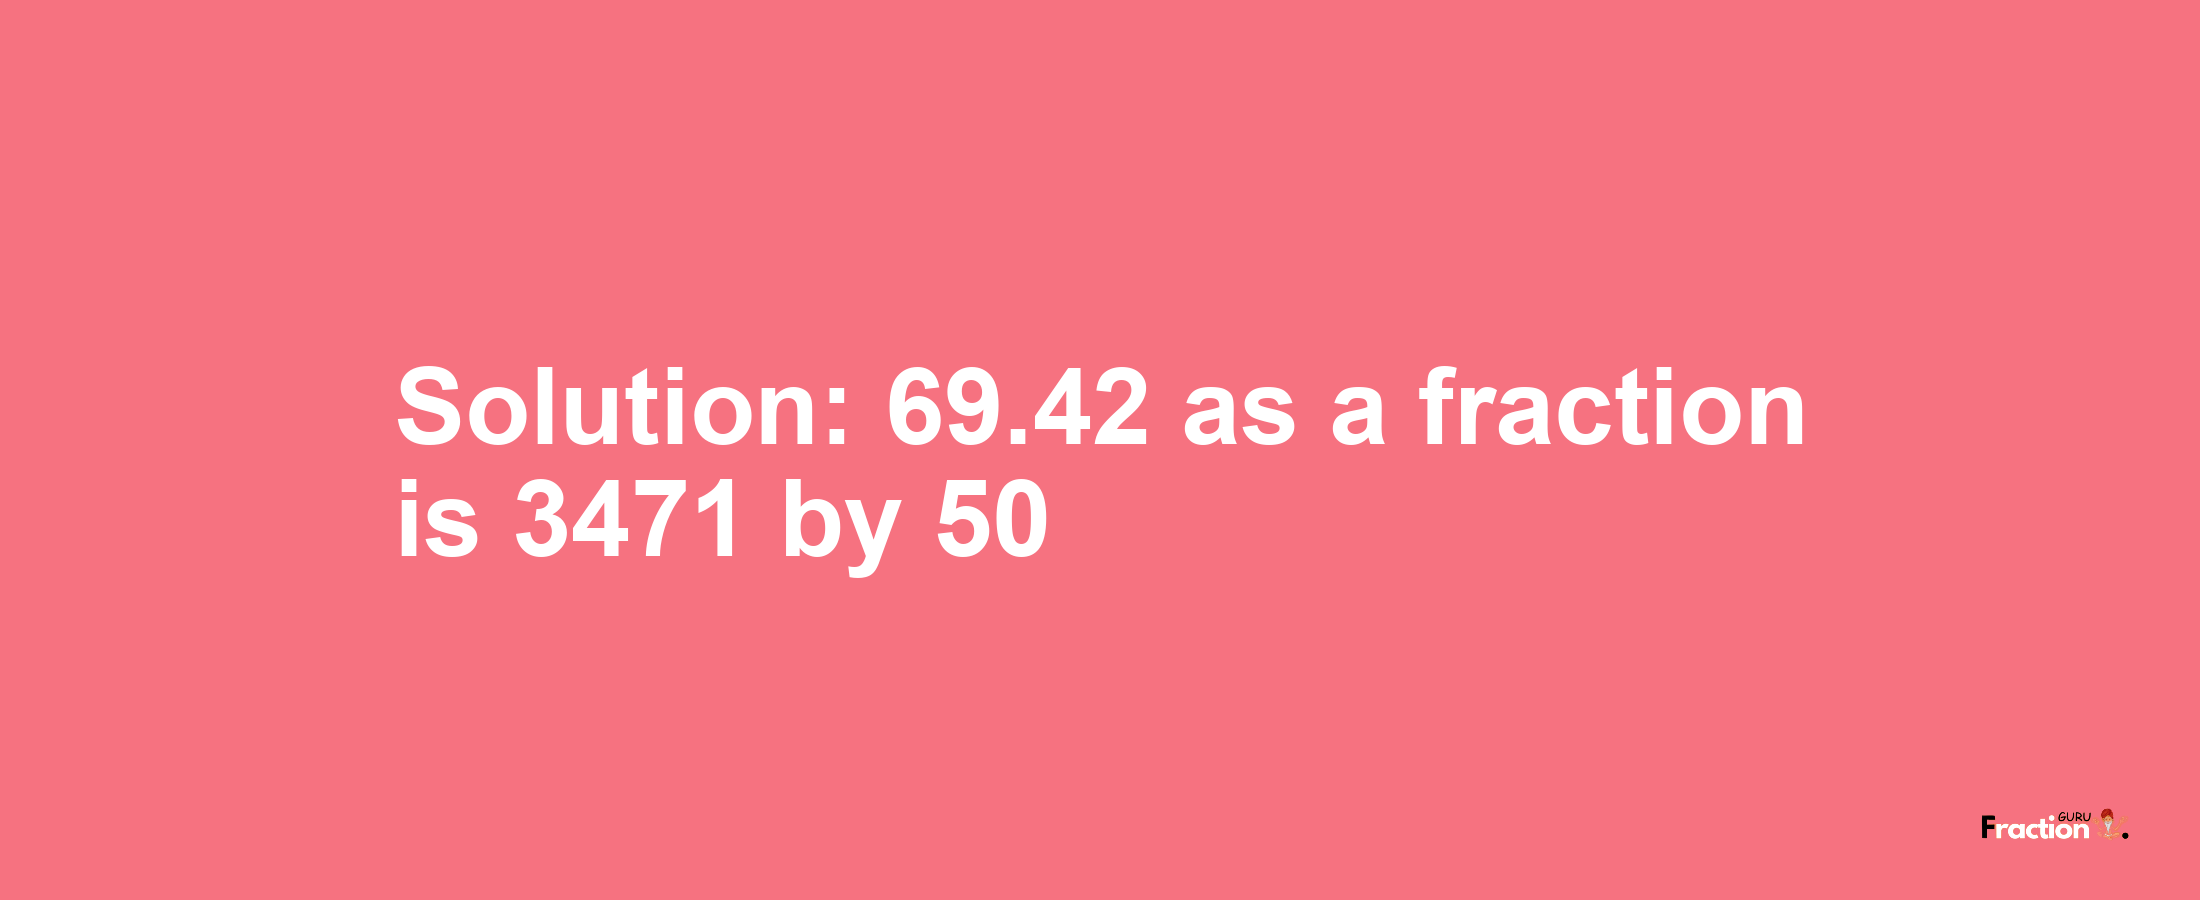 Solution:69.42 as a fraction is 3471/50